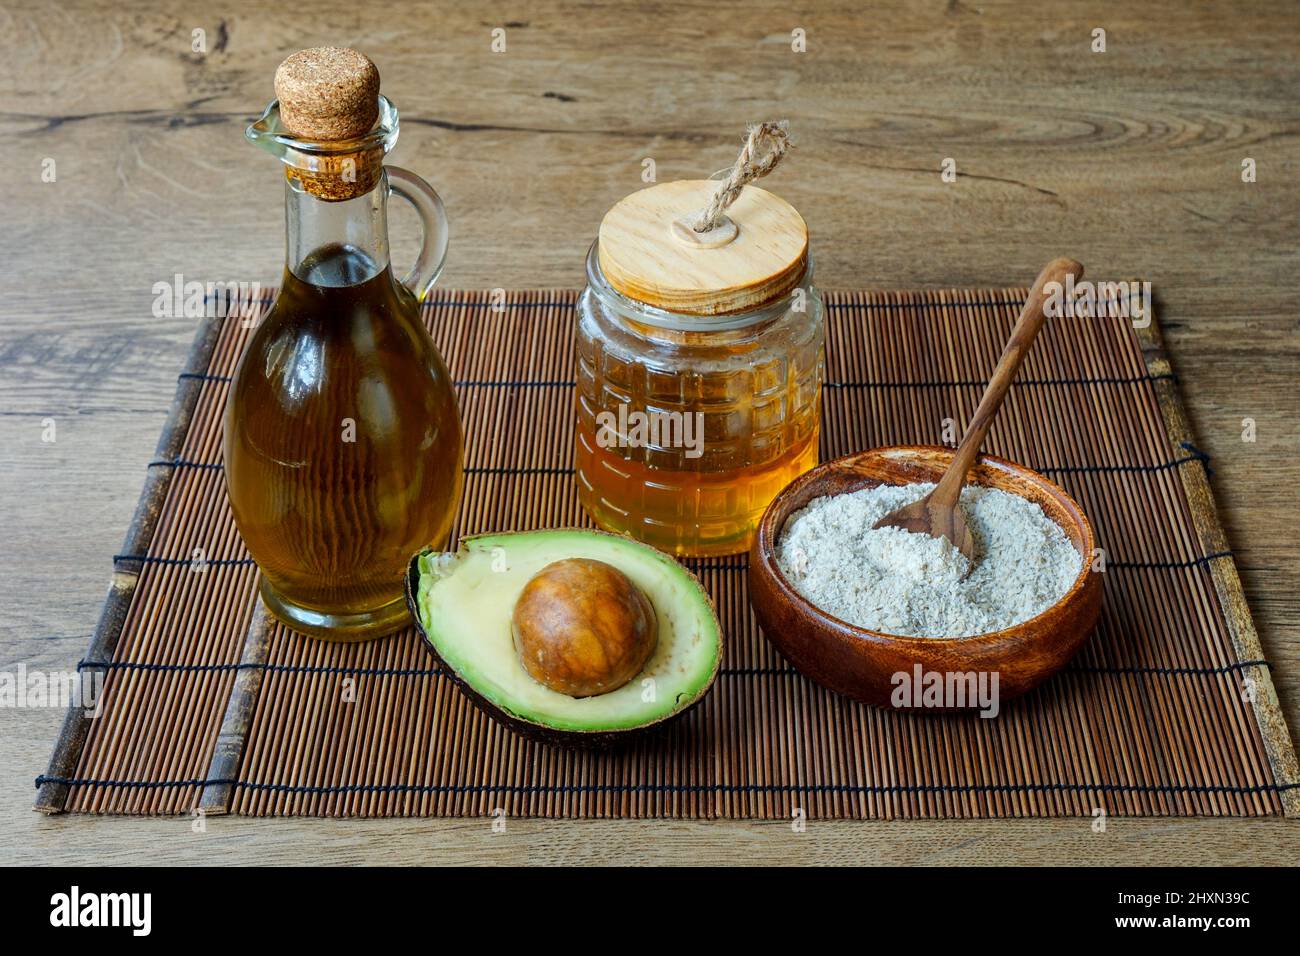 Olive oil, avocado, oatmeal and honey, ingredients often used in diy skincare. Stock Photo